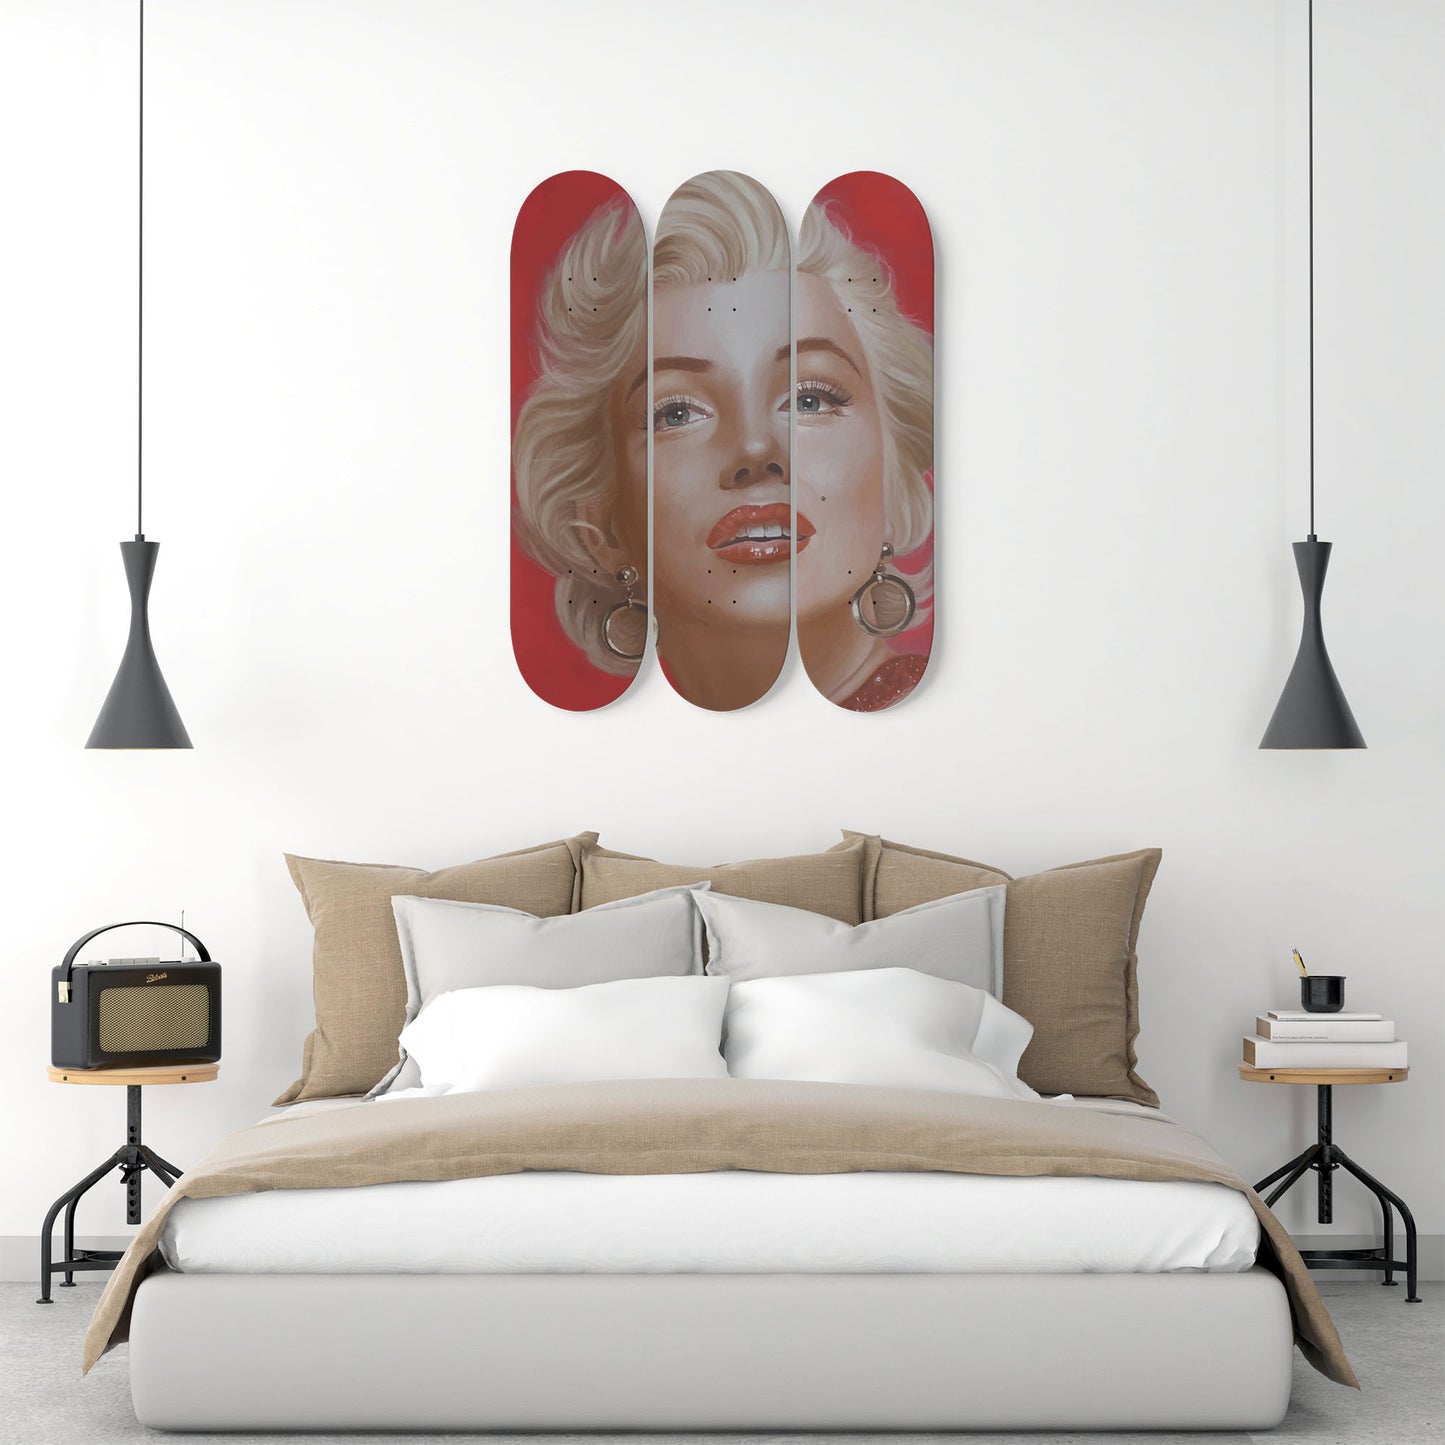 Marilyn Monroe Artwork 6 | 3-piece Skateboard Wall Art | Made with Maple Wood | Wall Hanging Decoration | Best Unique Gift for Home Decor